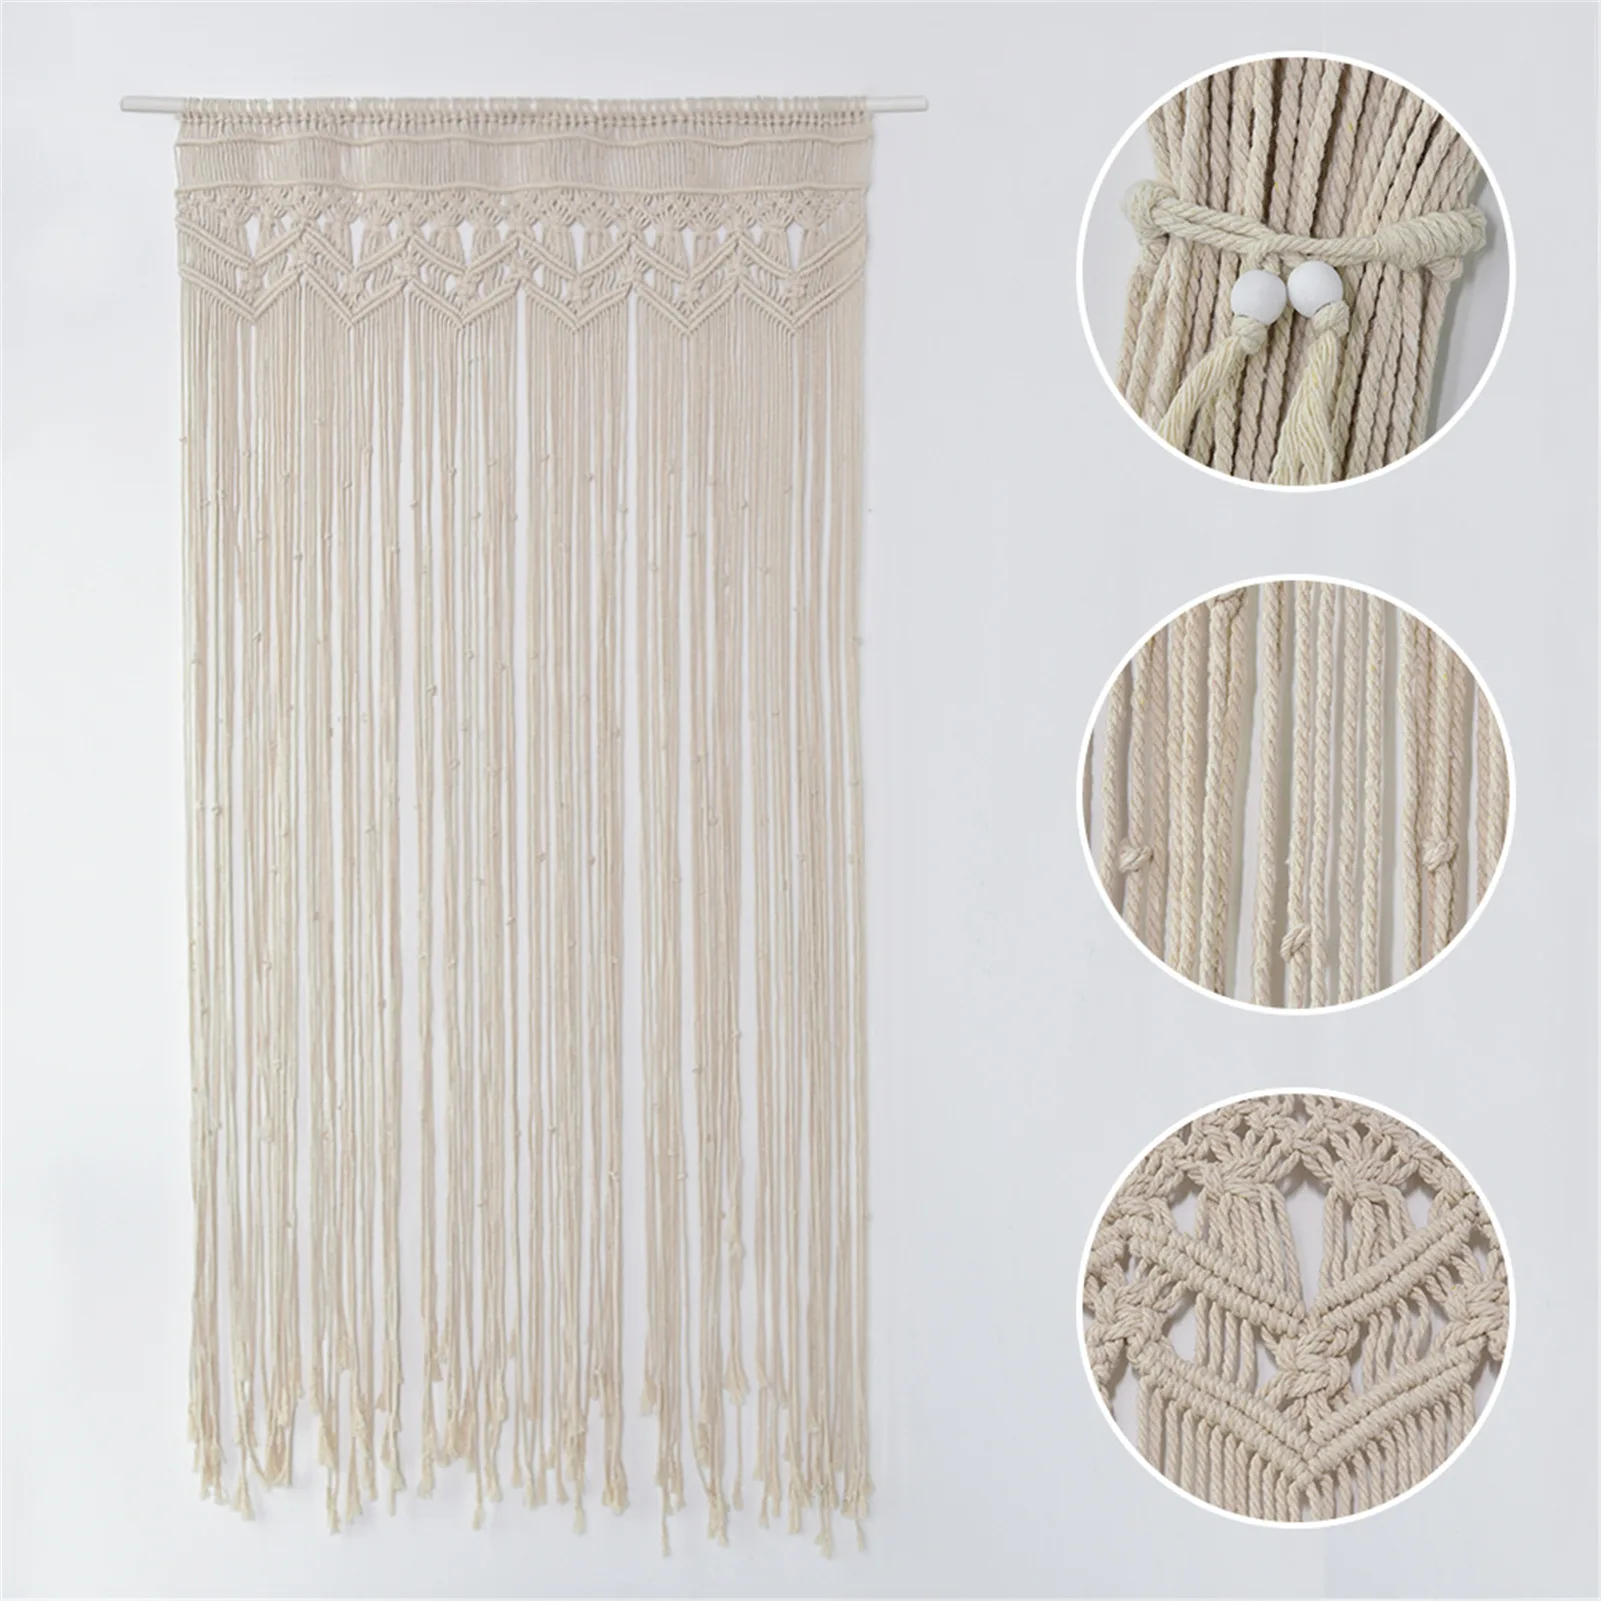 Hand-woven Tapestry Cotton Yarn Knitted Door Curtain Wedding Party Backdrop  Decoration Nordic Bohemian Art Door Curtain 90x180cm - Tapestry - AliExpress